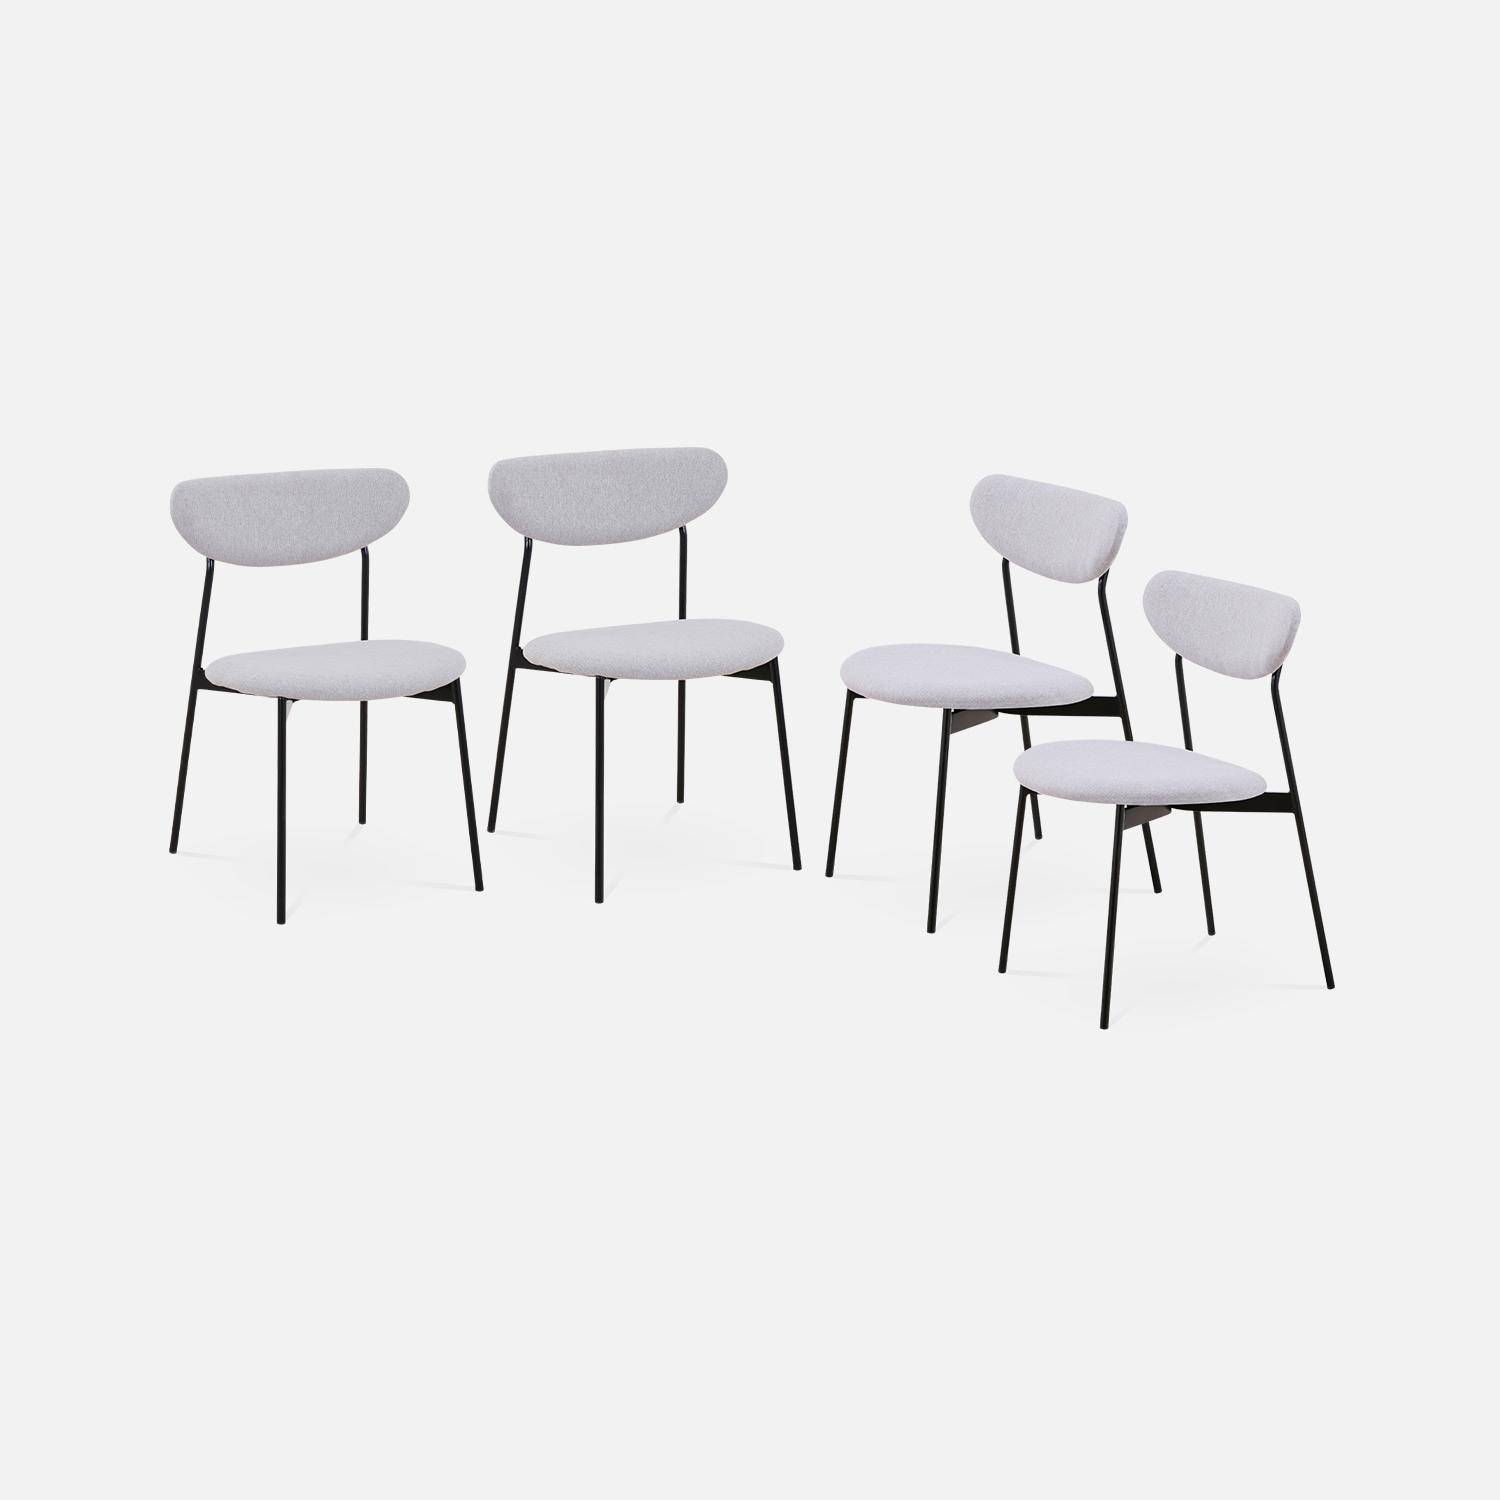 Set of 4 retro style dining chairs with steel legs - Arty - Light Grey,sweeek,Photo2